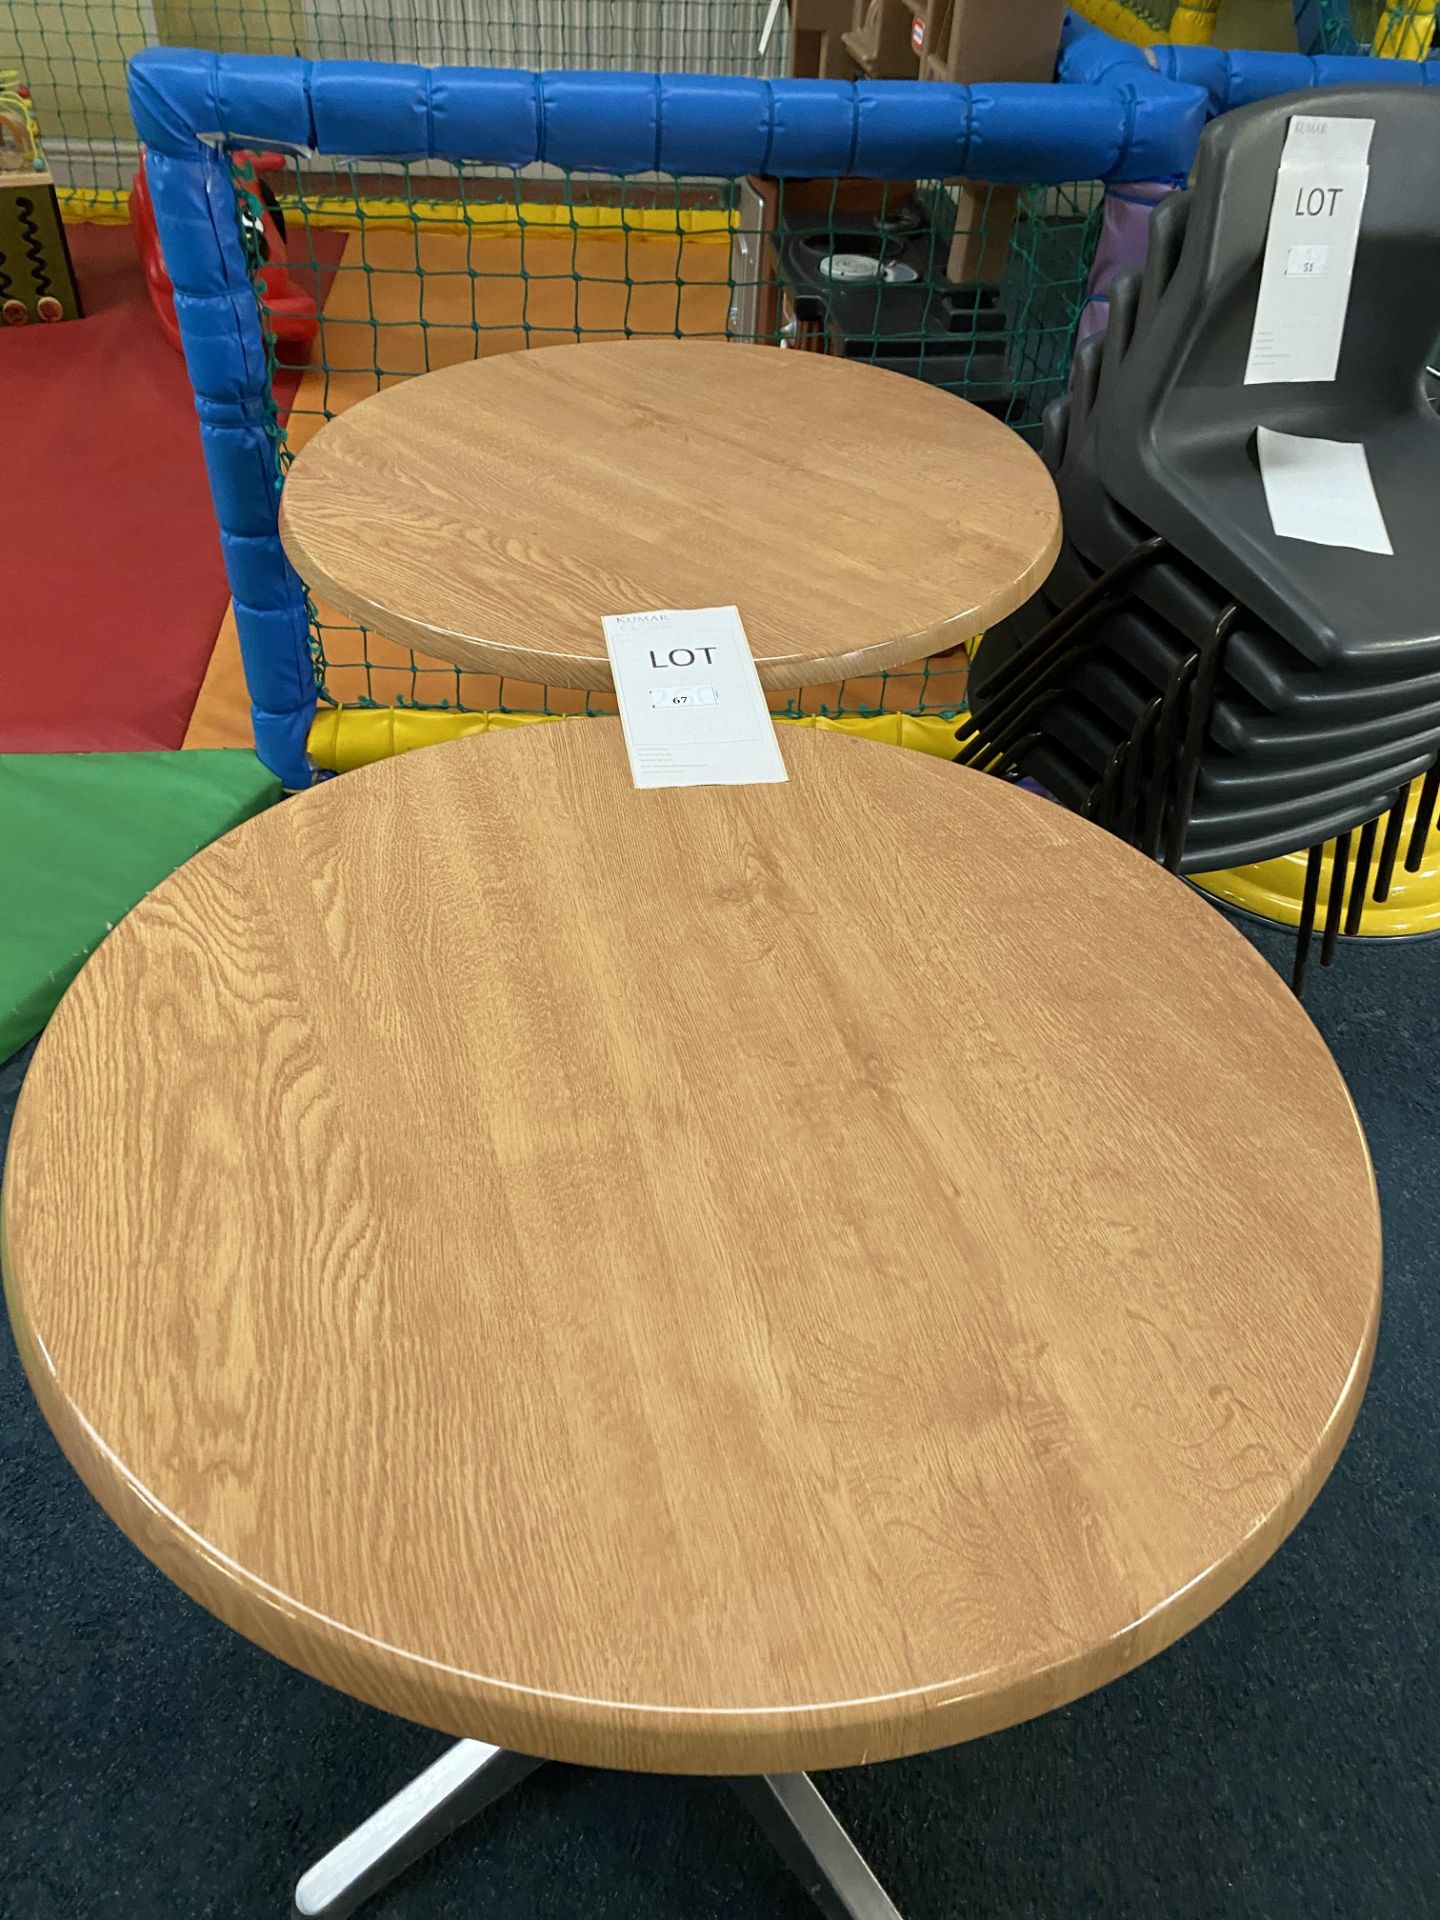 2x Light Oak Effect Circular Tables with Steel Frame - Image 10 of 10